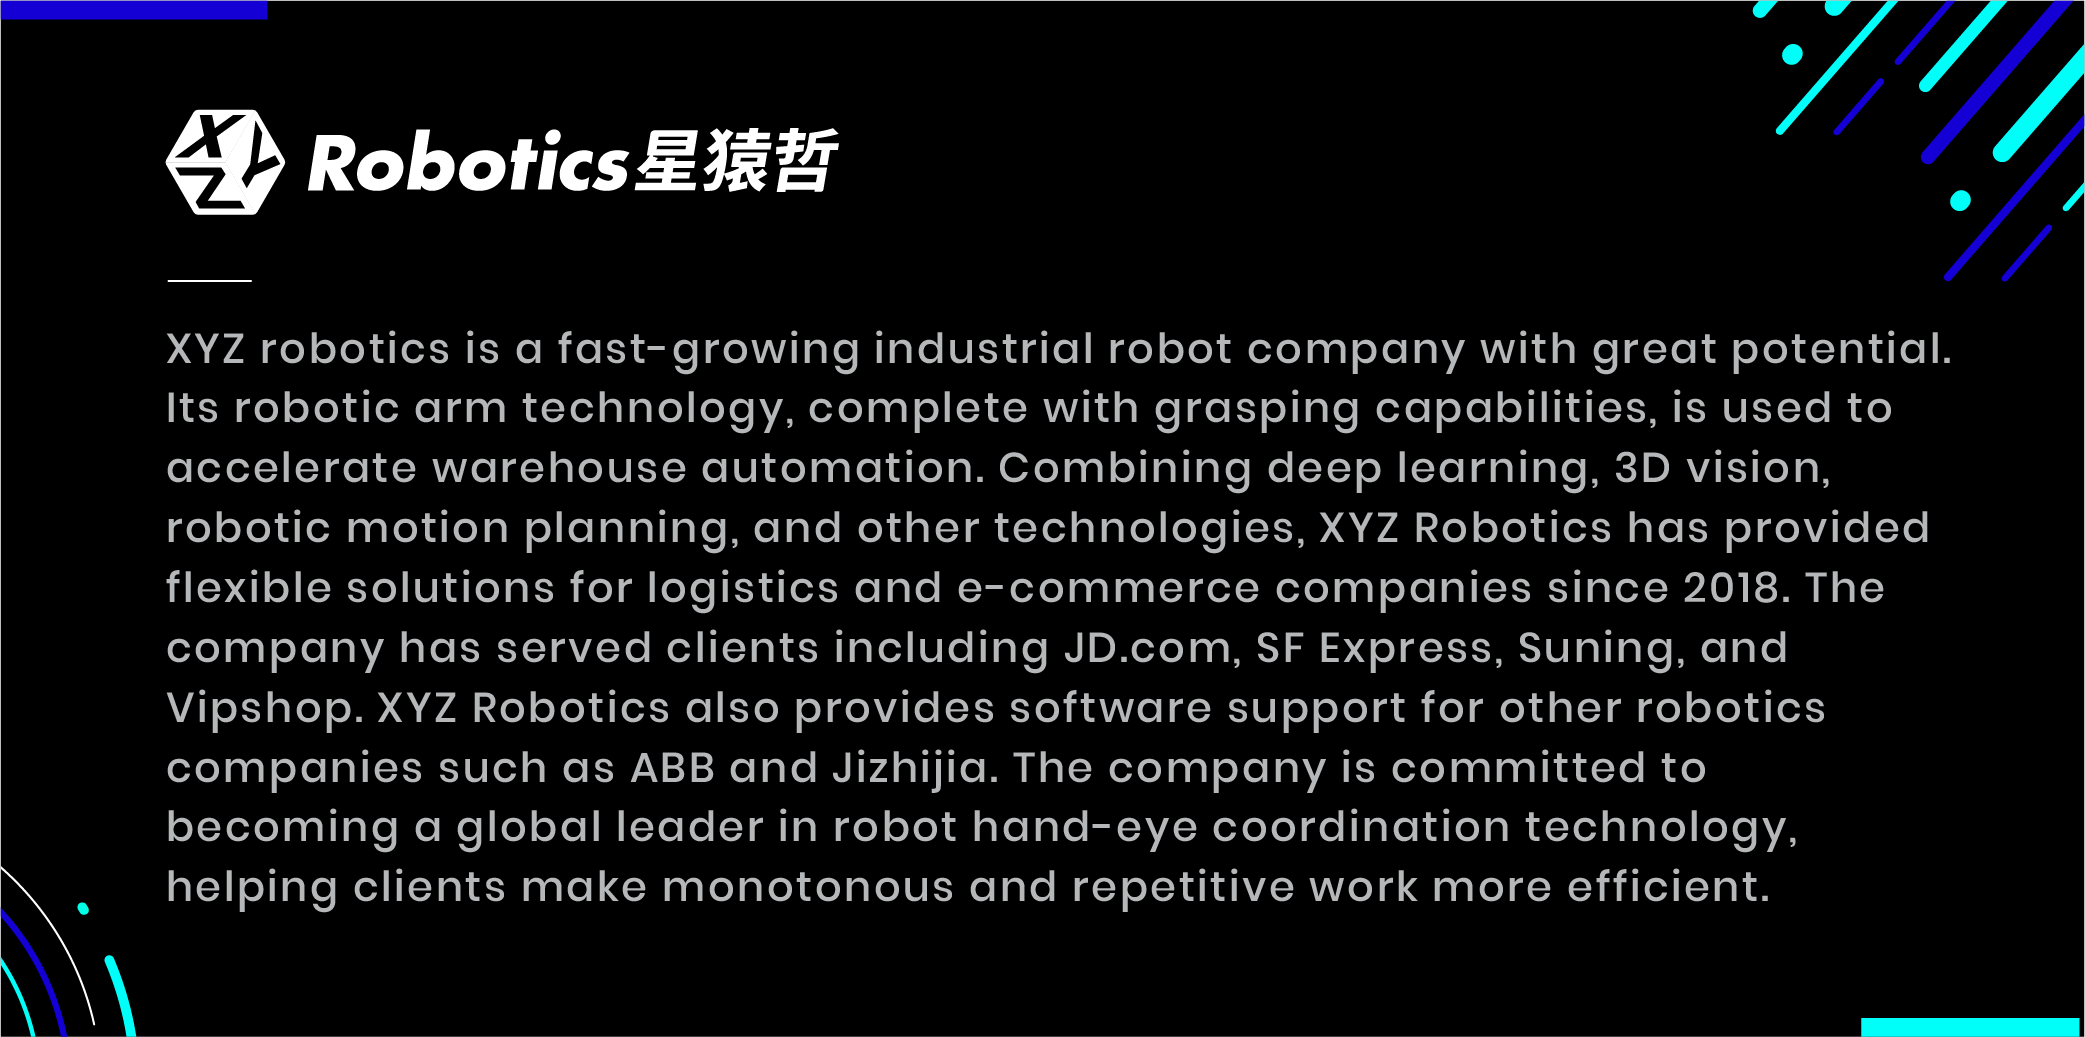 Xyz robotics industrial robots robotic arm technology warehouse automation deep learning motion planning 3d vision global leader